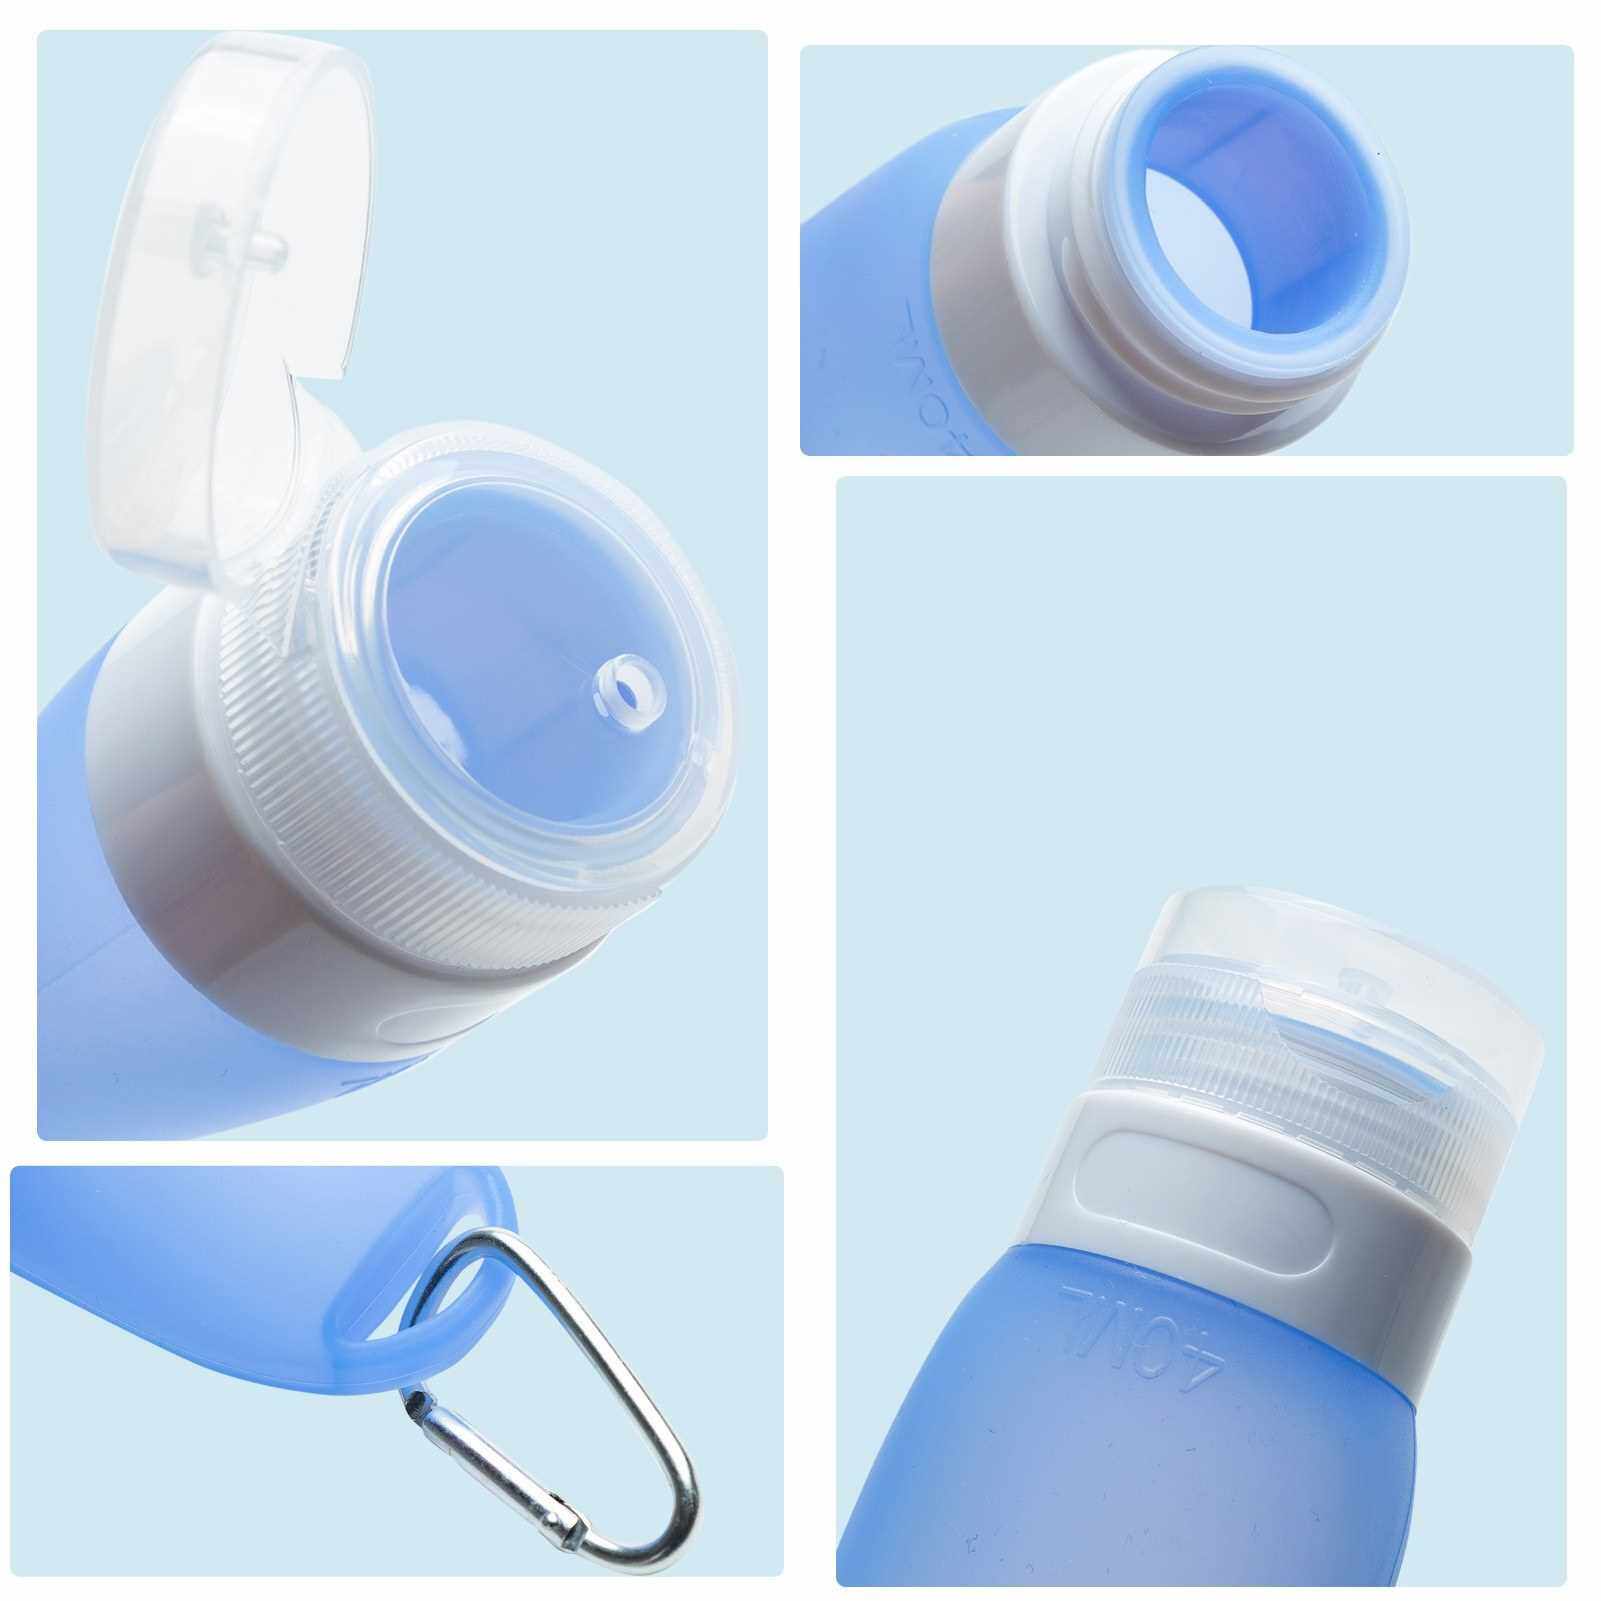 BEST SELLER 3PCS Travel Bottles with Snap Hook Hanging Soft Silicone Portable Refillable Empty Containers for Hand Sanitizer Shampoo Flip Cap School Work Outdoor (Blue)